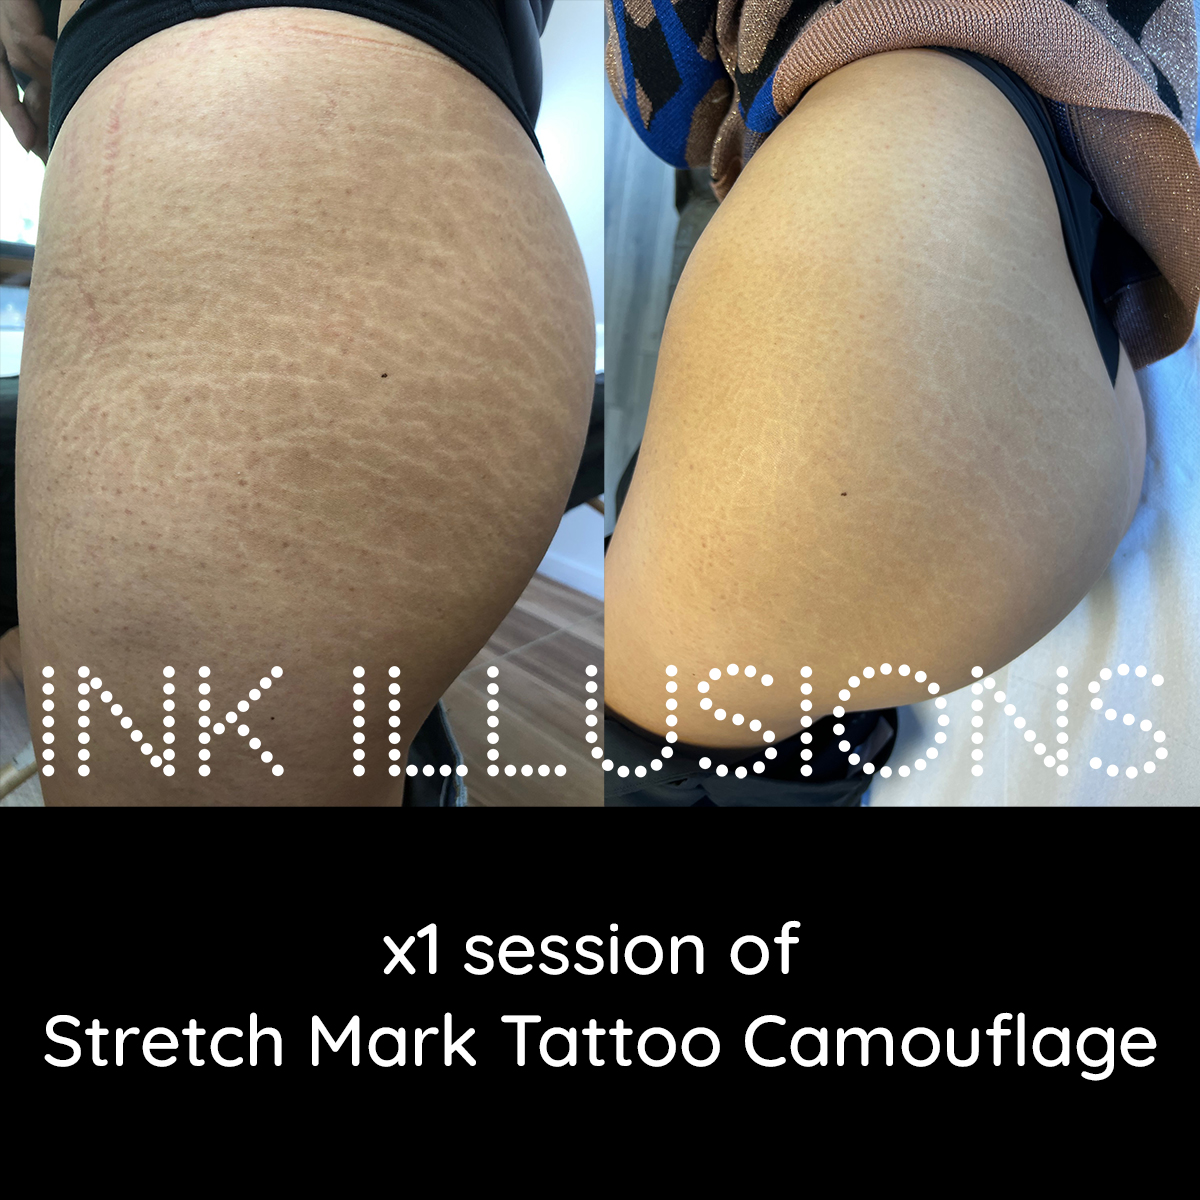 What is the most effective treatment for Stretch Marks? - Ink Illusions